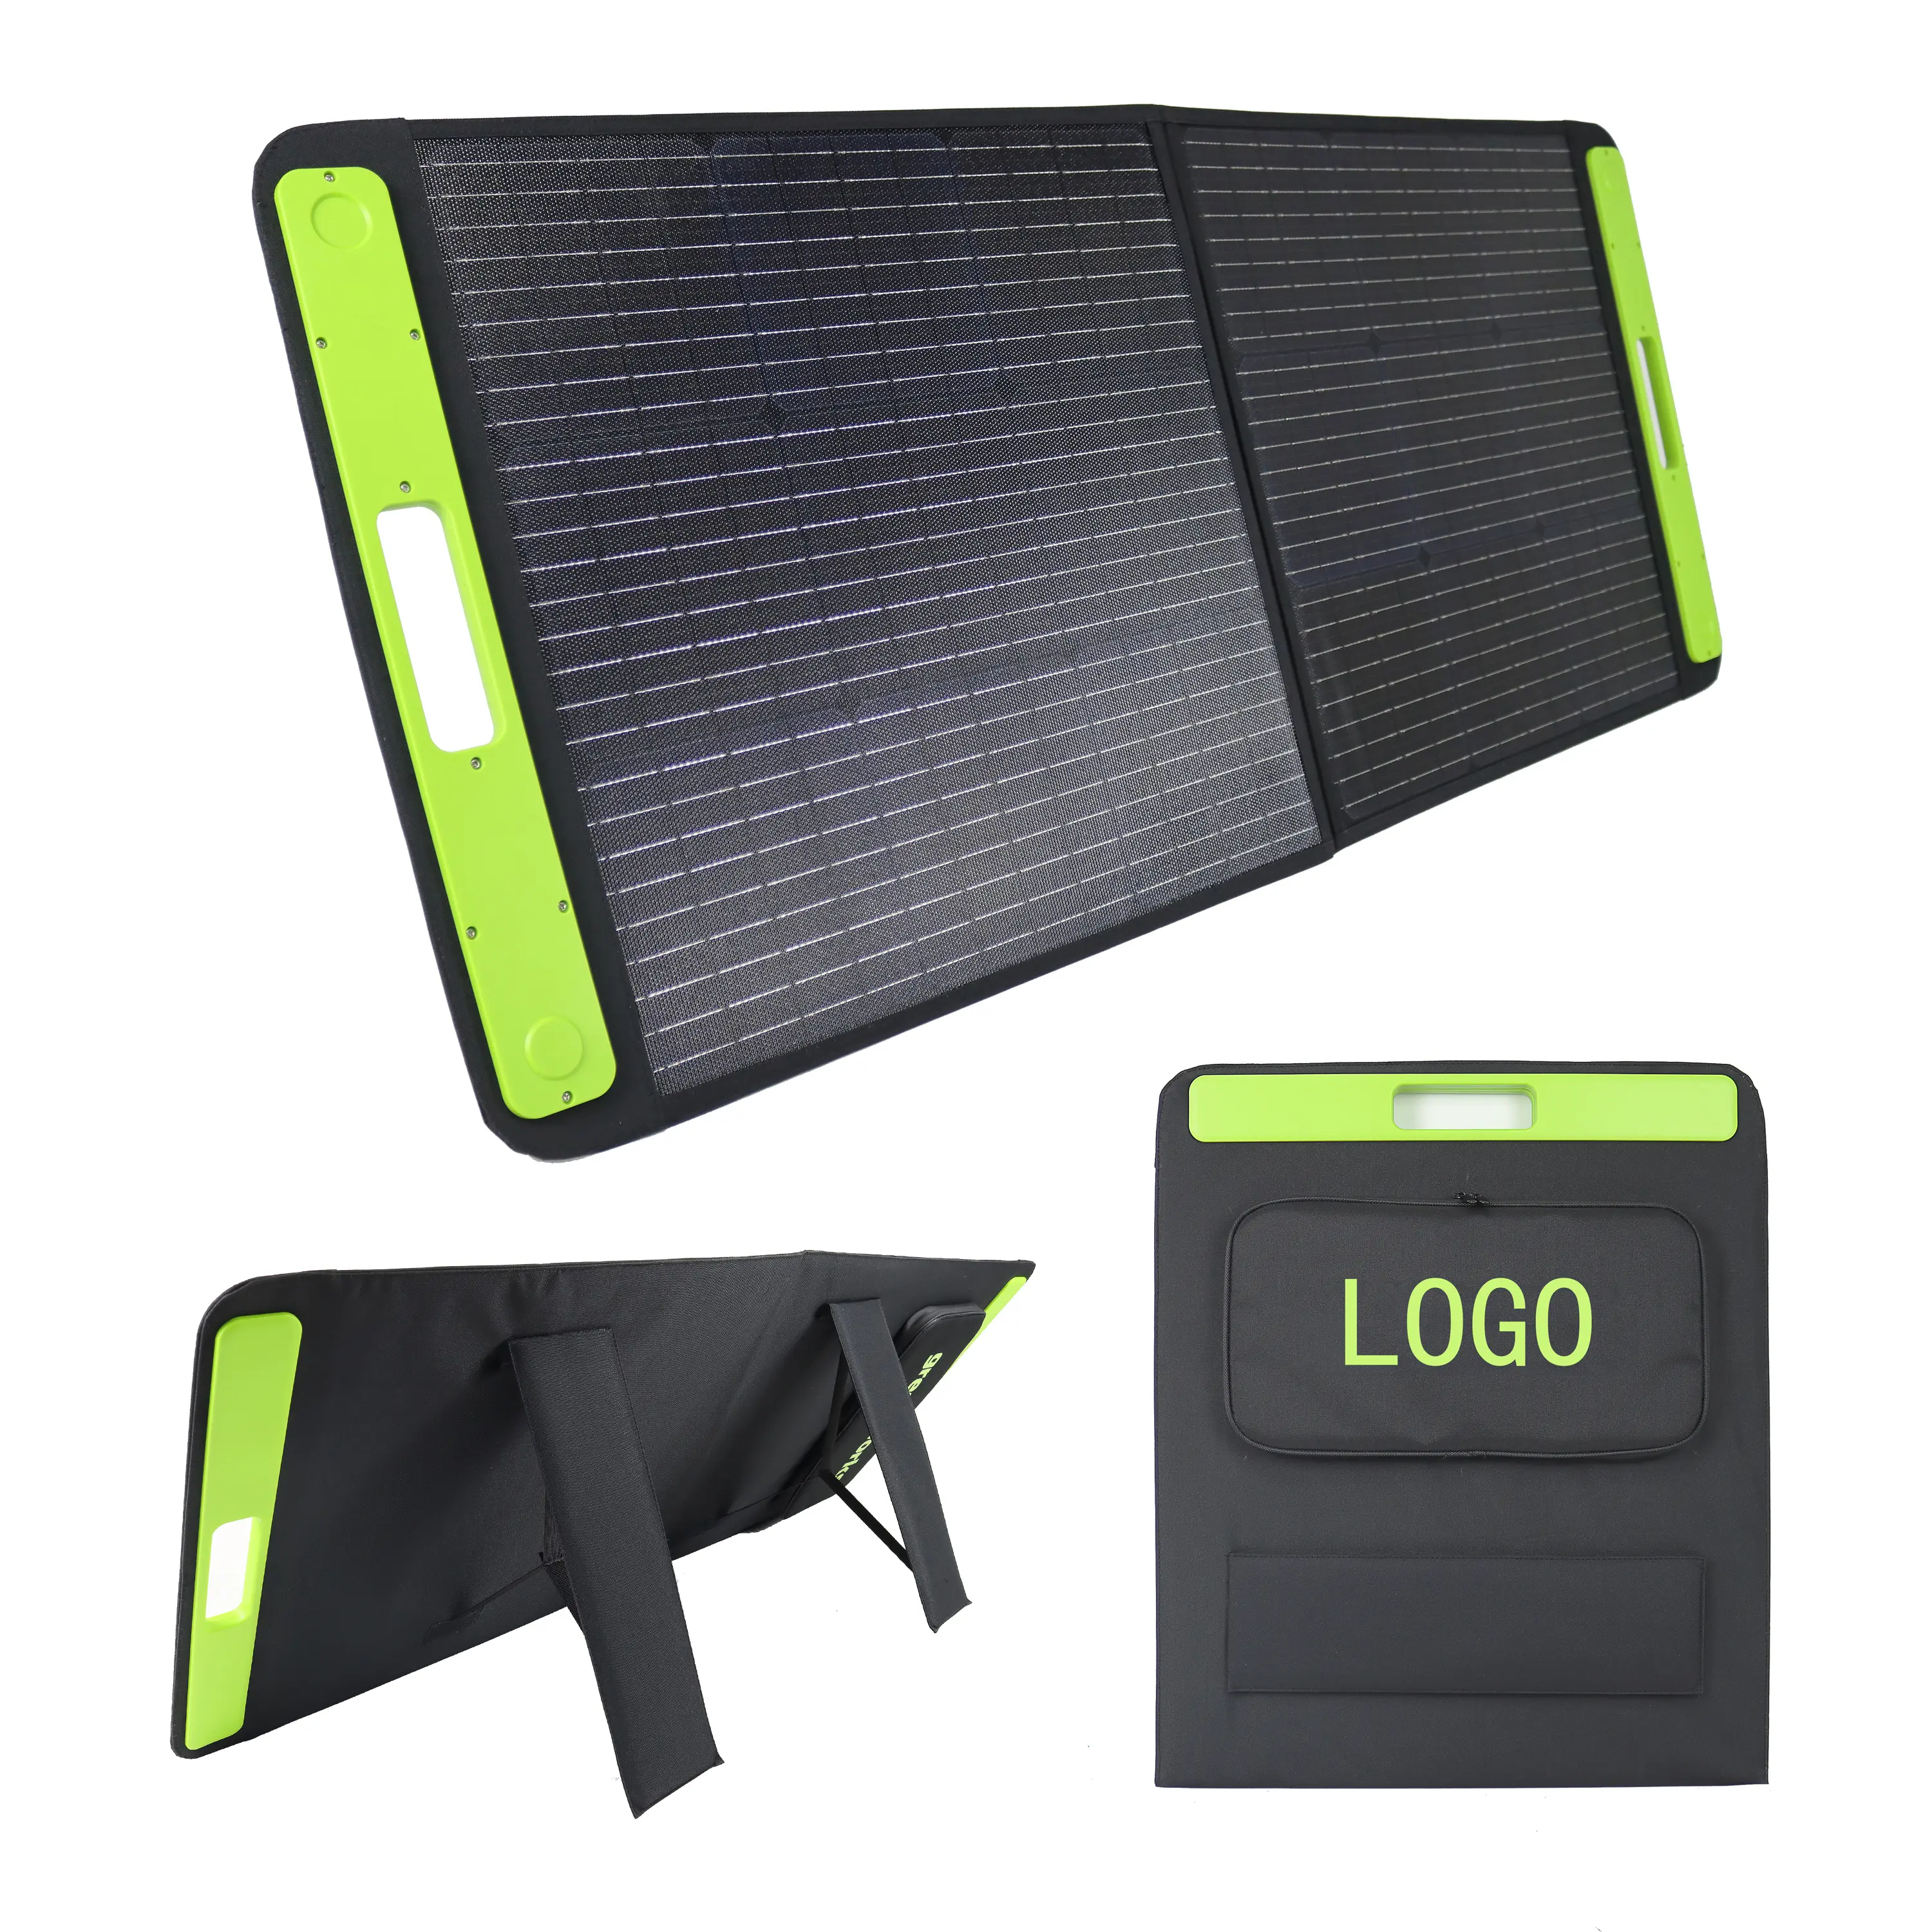 Outdoor portable 100w folding solar panels foldable solar panel kit for campers